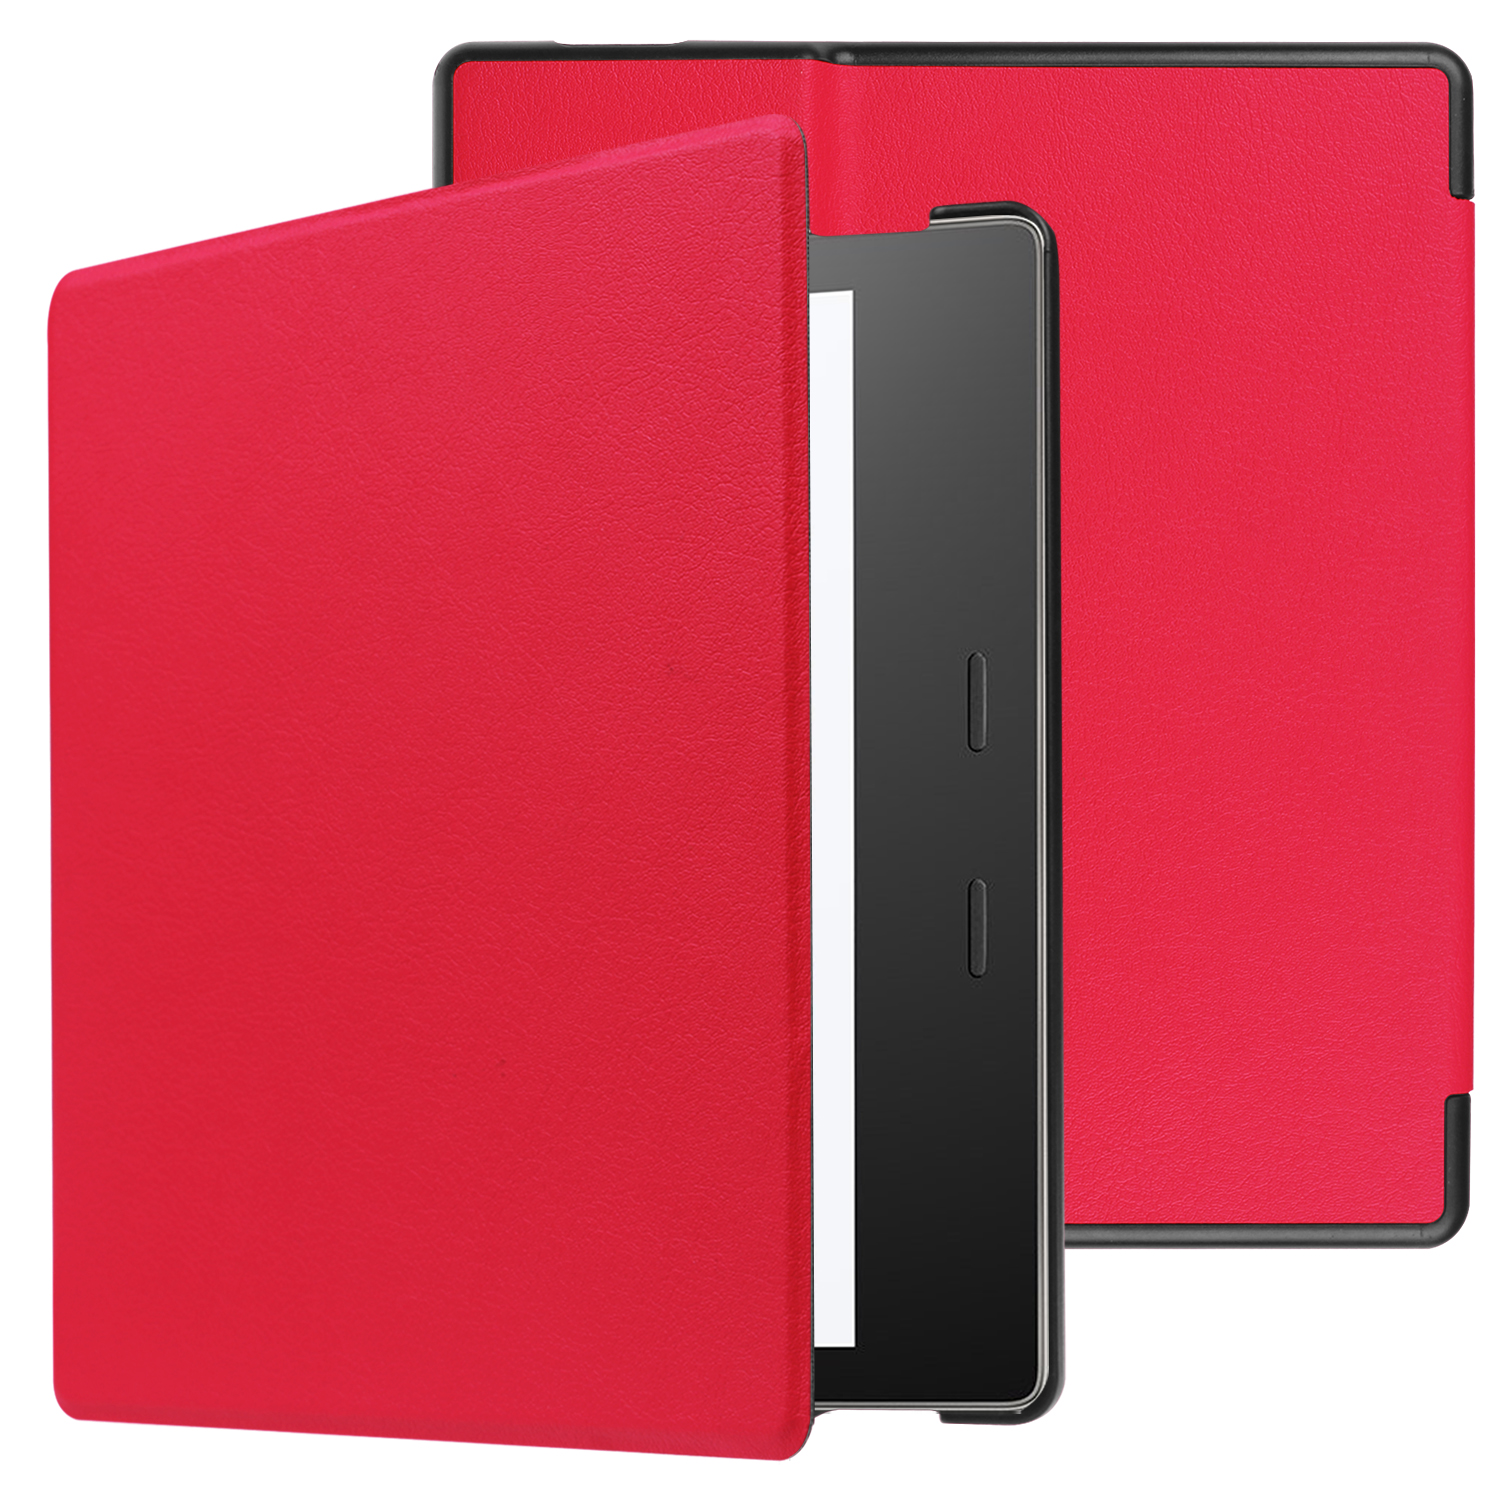 Allytech Kindle Oasis Case (2019/2017, 10th / 9th Generation), Ultra Slim PU Leather Trifold Stand Smart Shell Auto Sleep Wake Magnetic Shockproof Case for All-New Amazon Kinlde Oasis, Red - image 1 of 6